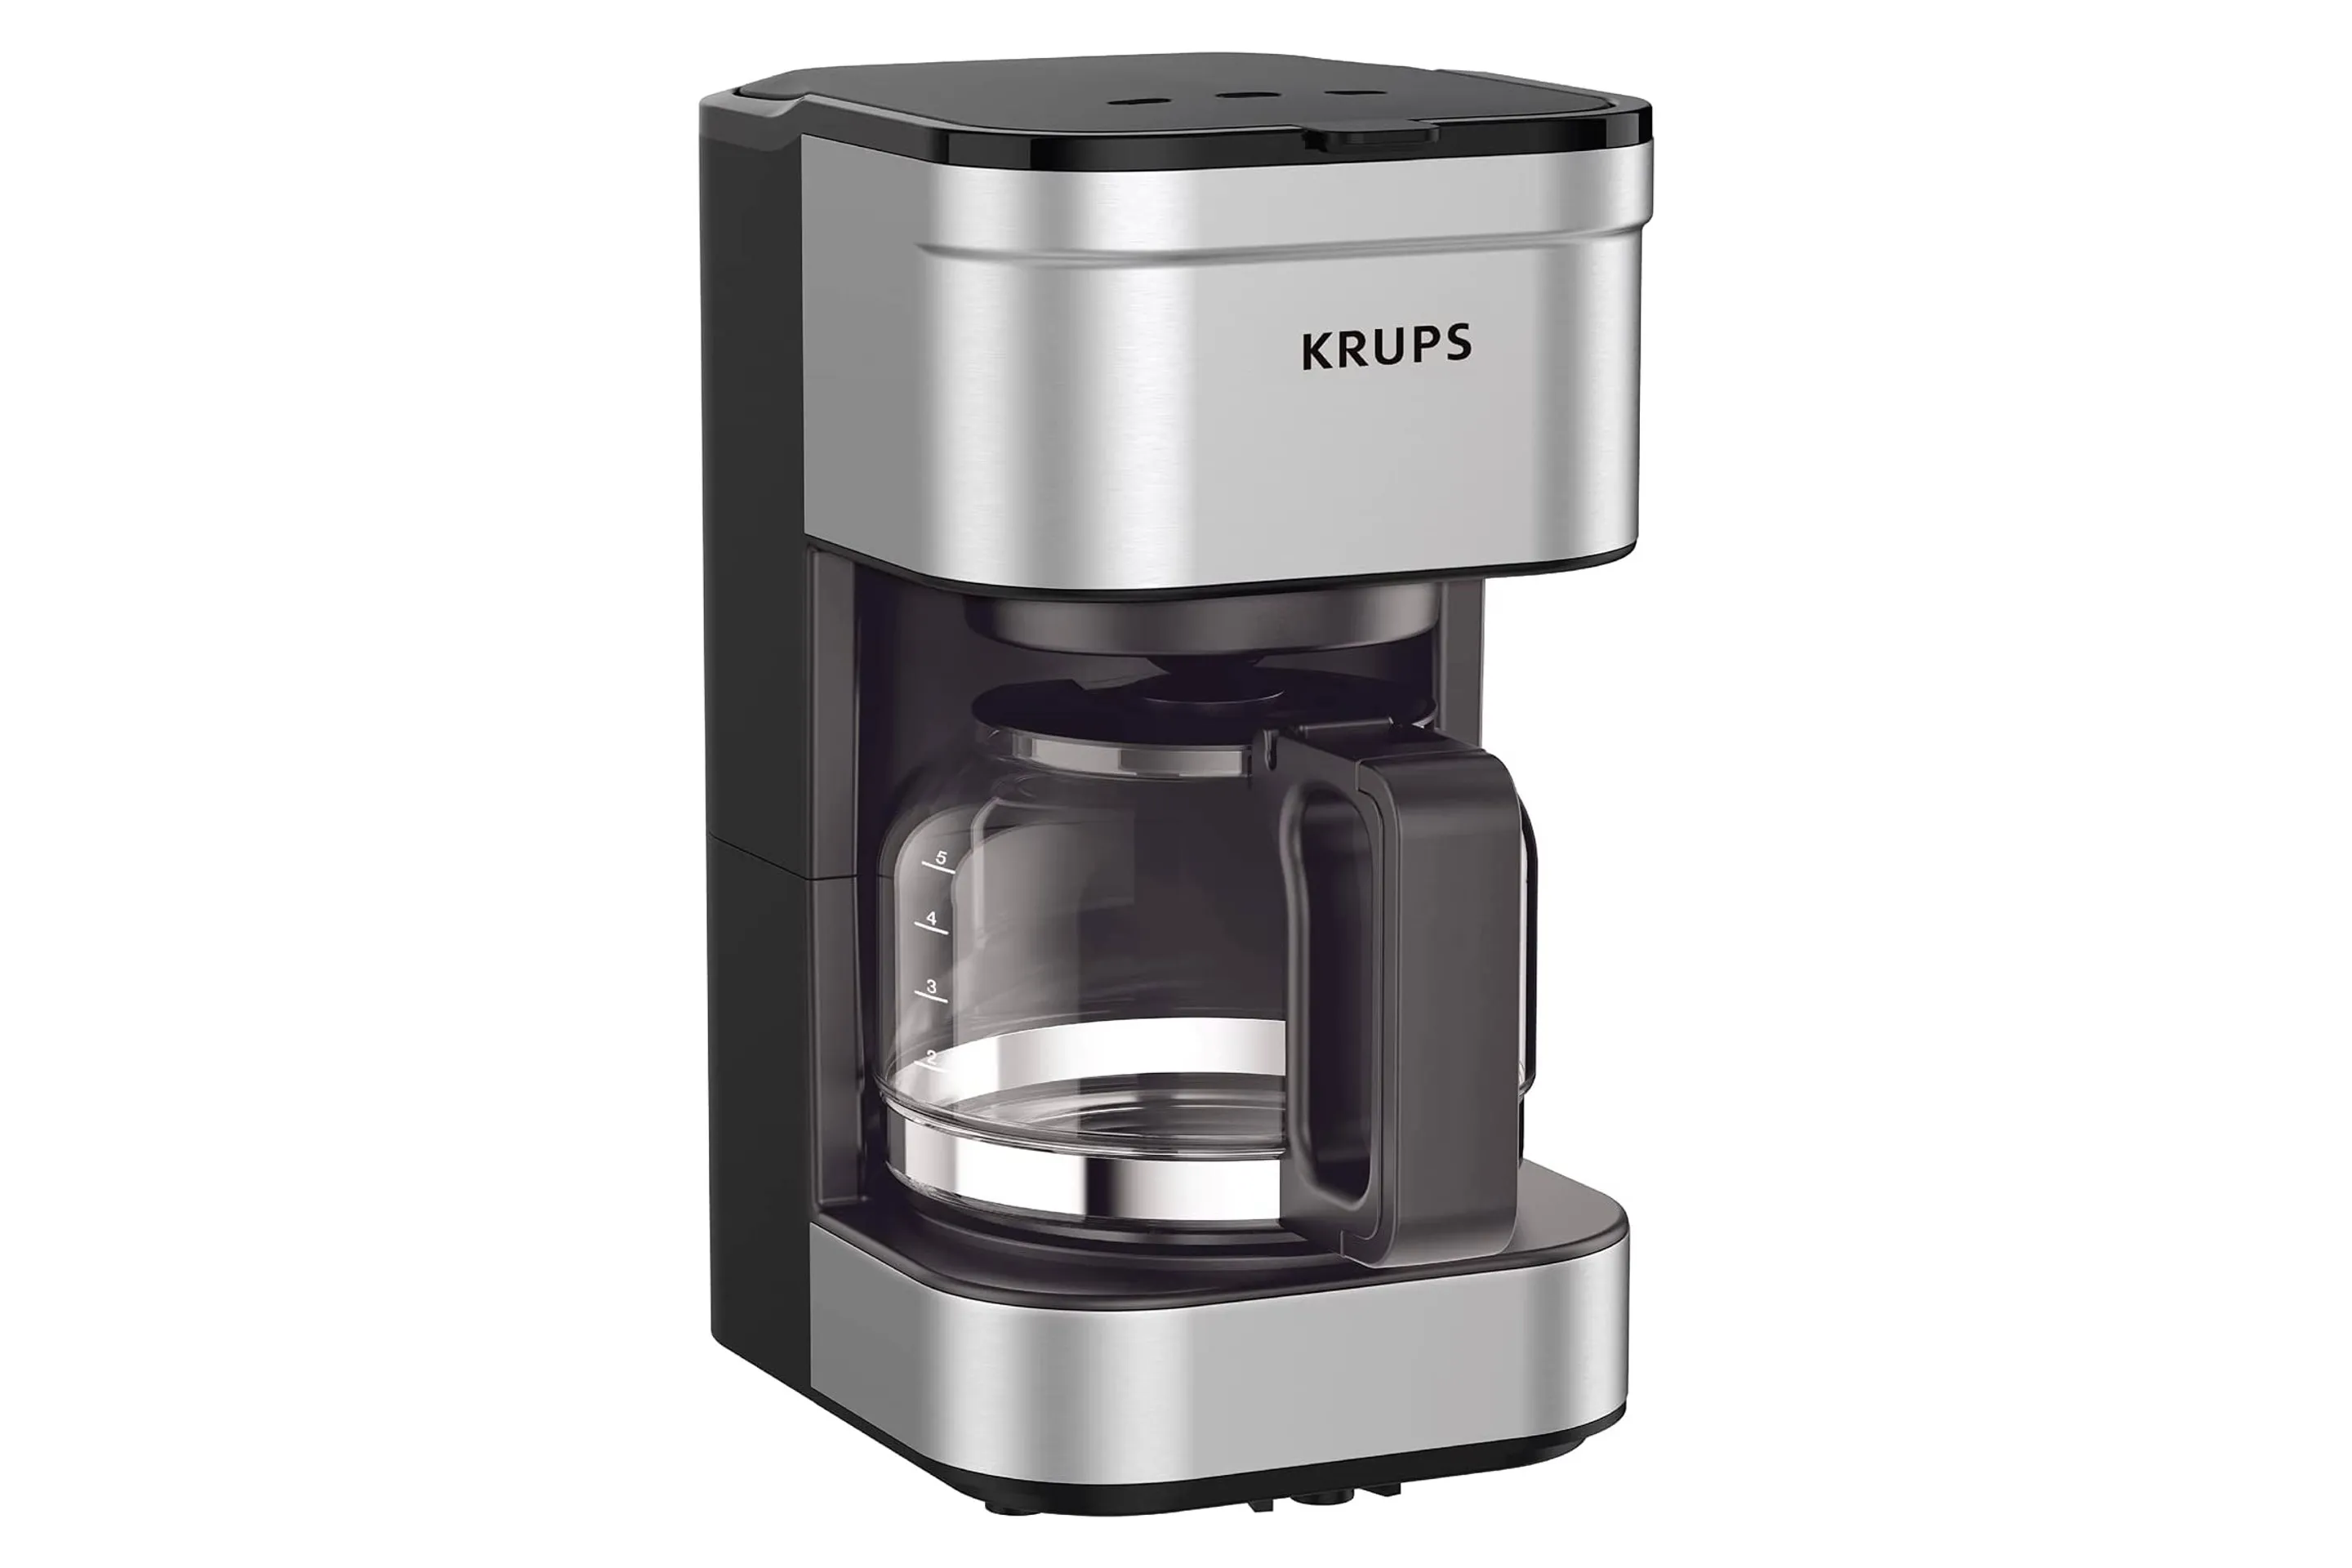 11 Best Drip Coffee Makers For Your Caffeine Fix